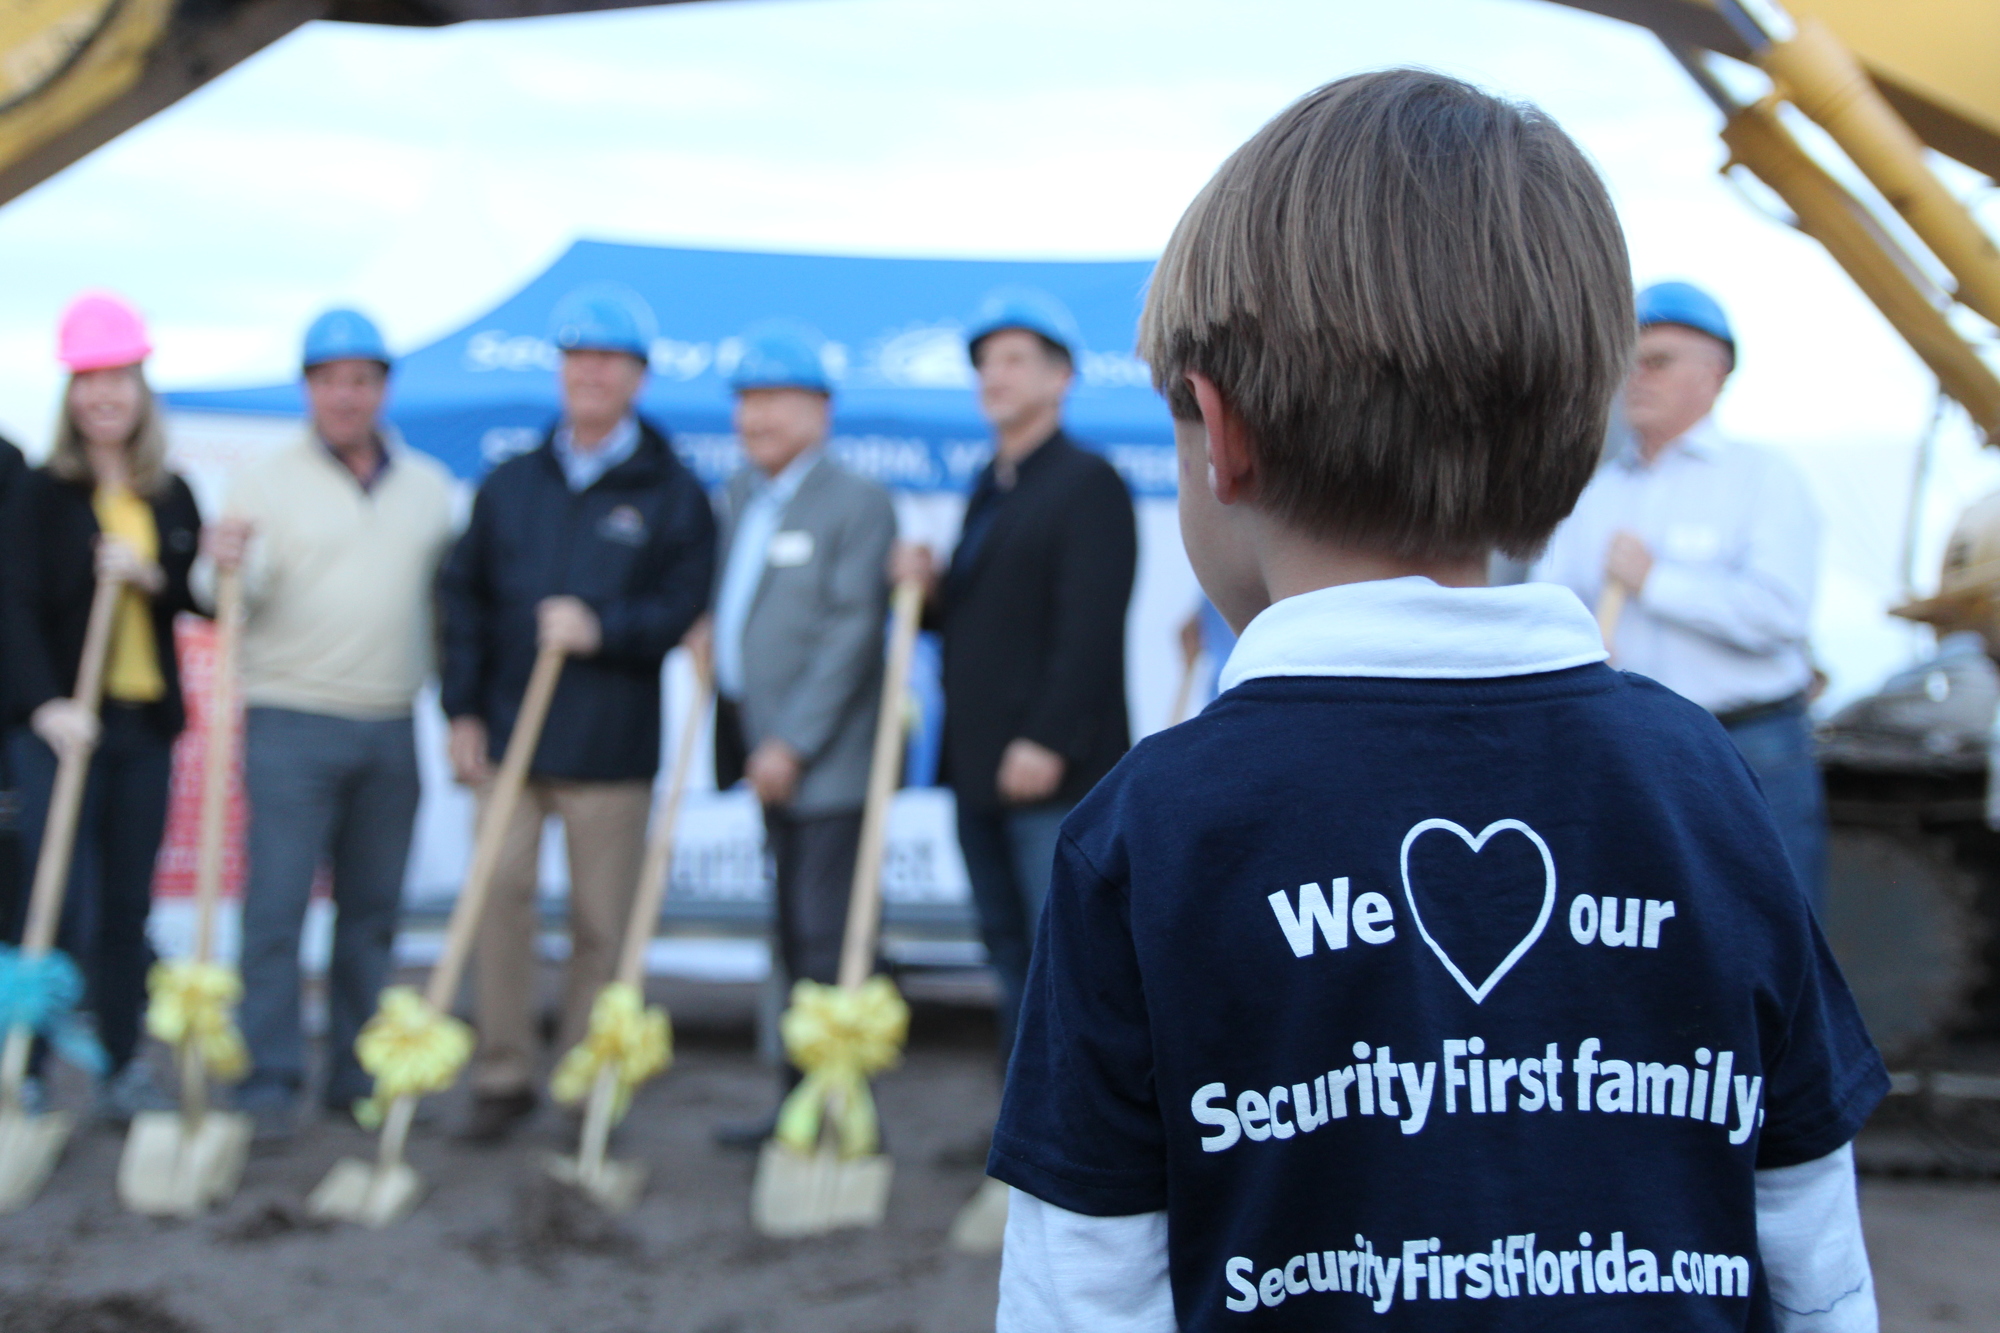 Henry DeVriese looks on as Security First board members break ground during Security First's groundbreaking ceremony for its new headquarters on March 7. Photo by Jarleene Almenas